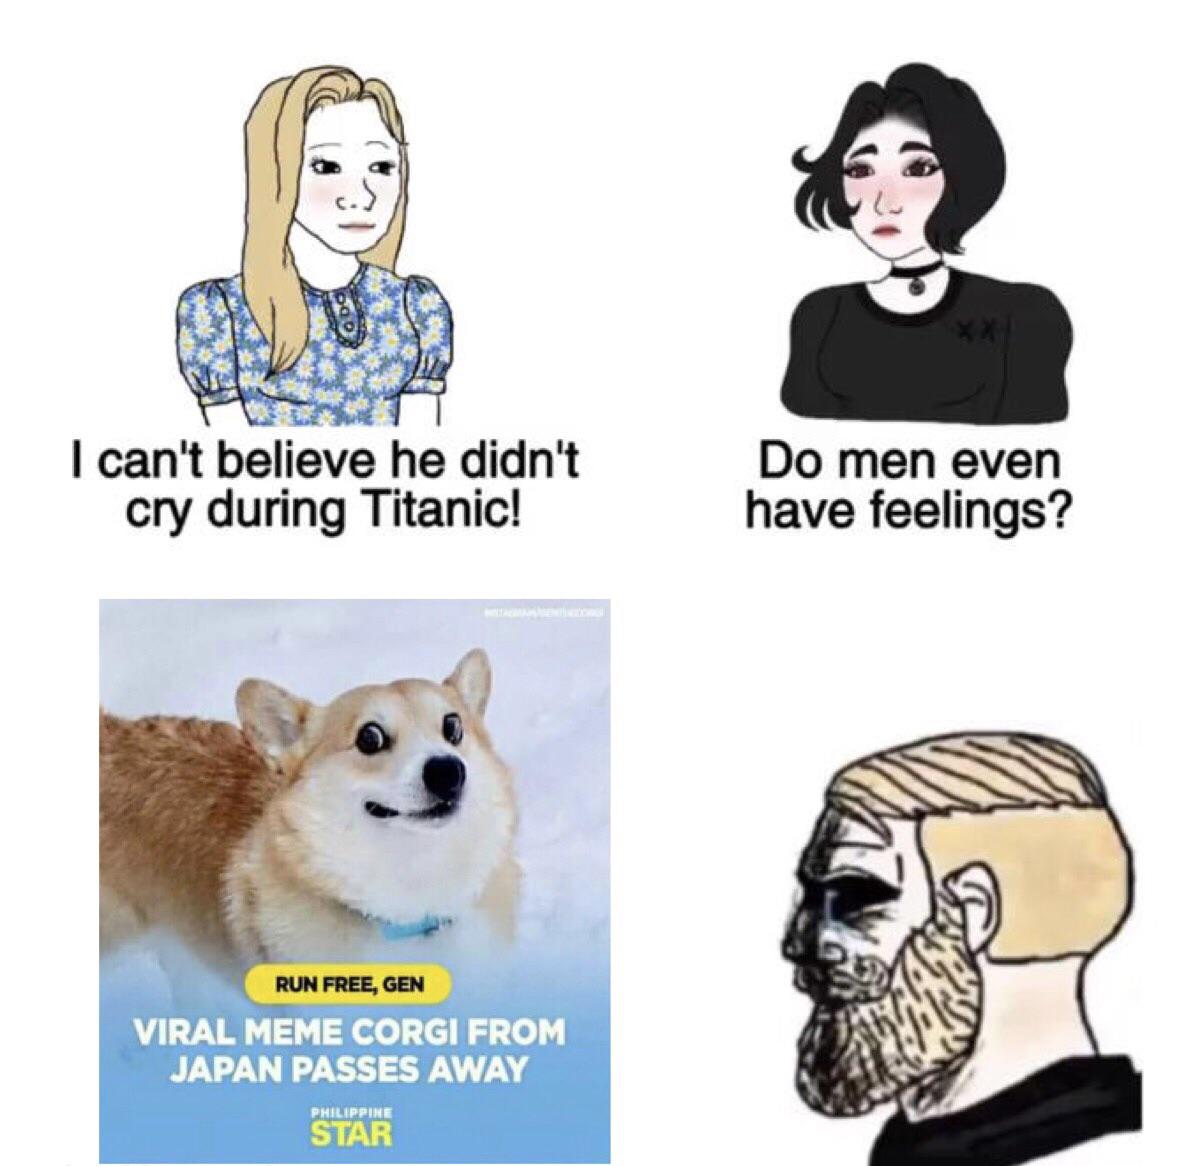 can t believe he didn t cry - I can't believe he didn't cry during Titanic! Do men even have feelings? Run Free, Gen Viral Meme Corgi From Japan Passes Away Philippine Star